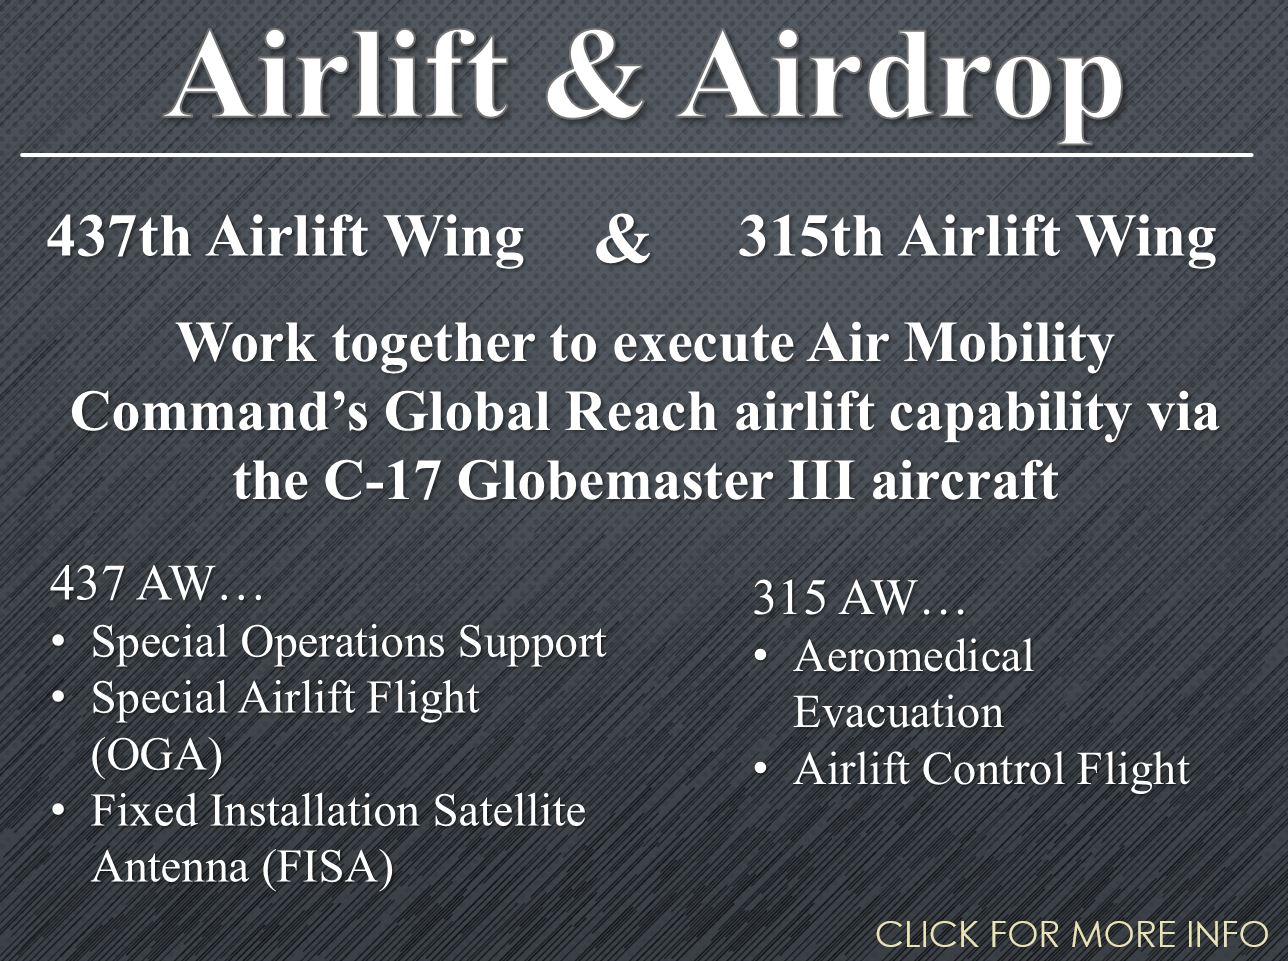 An infographic for Airlift and Airdrop